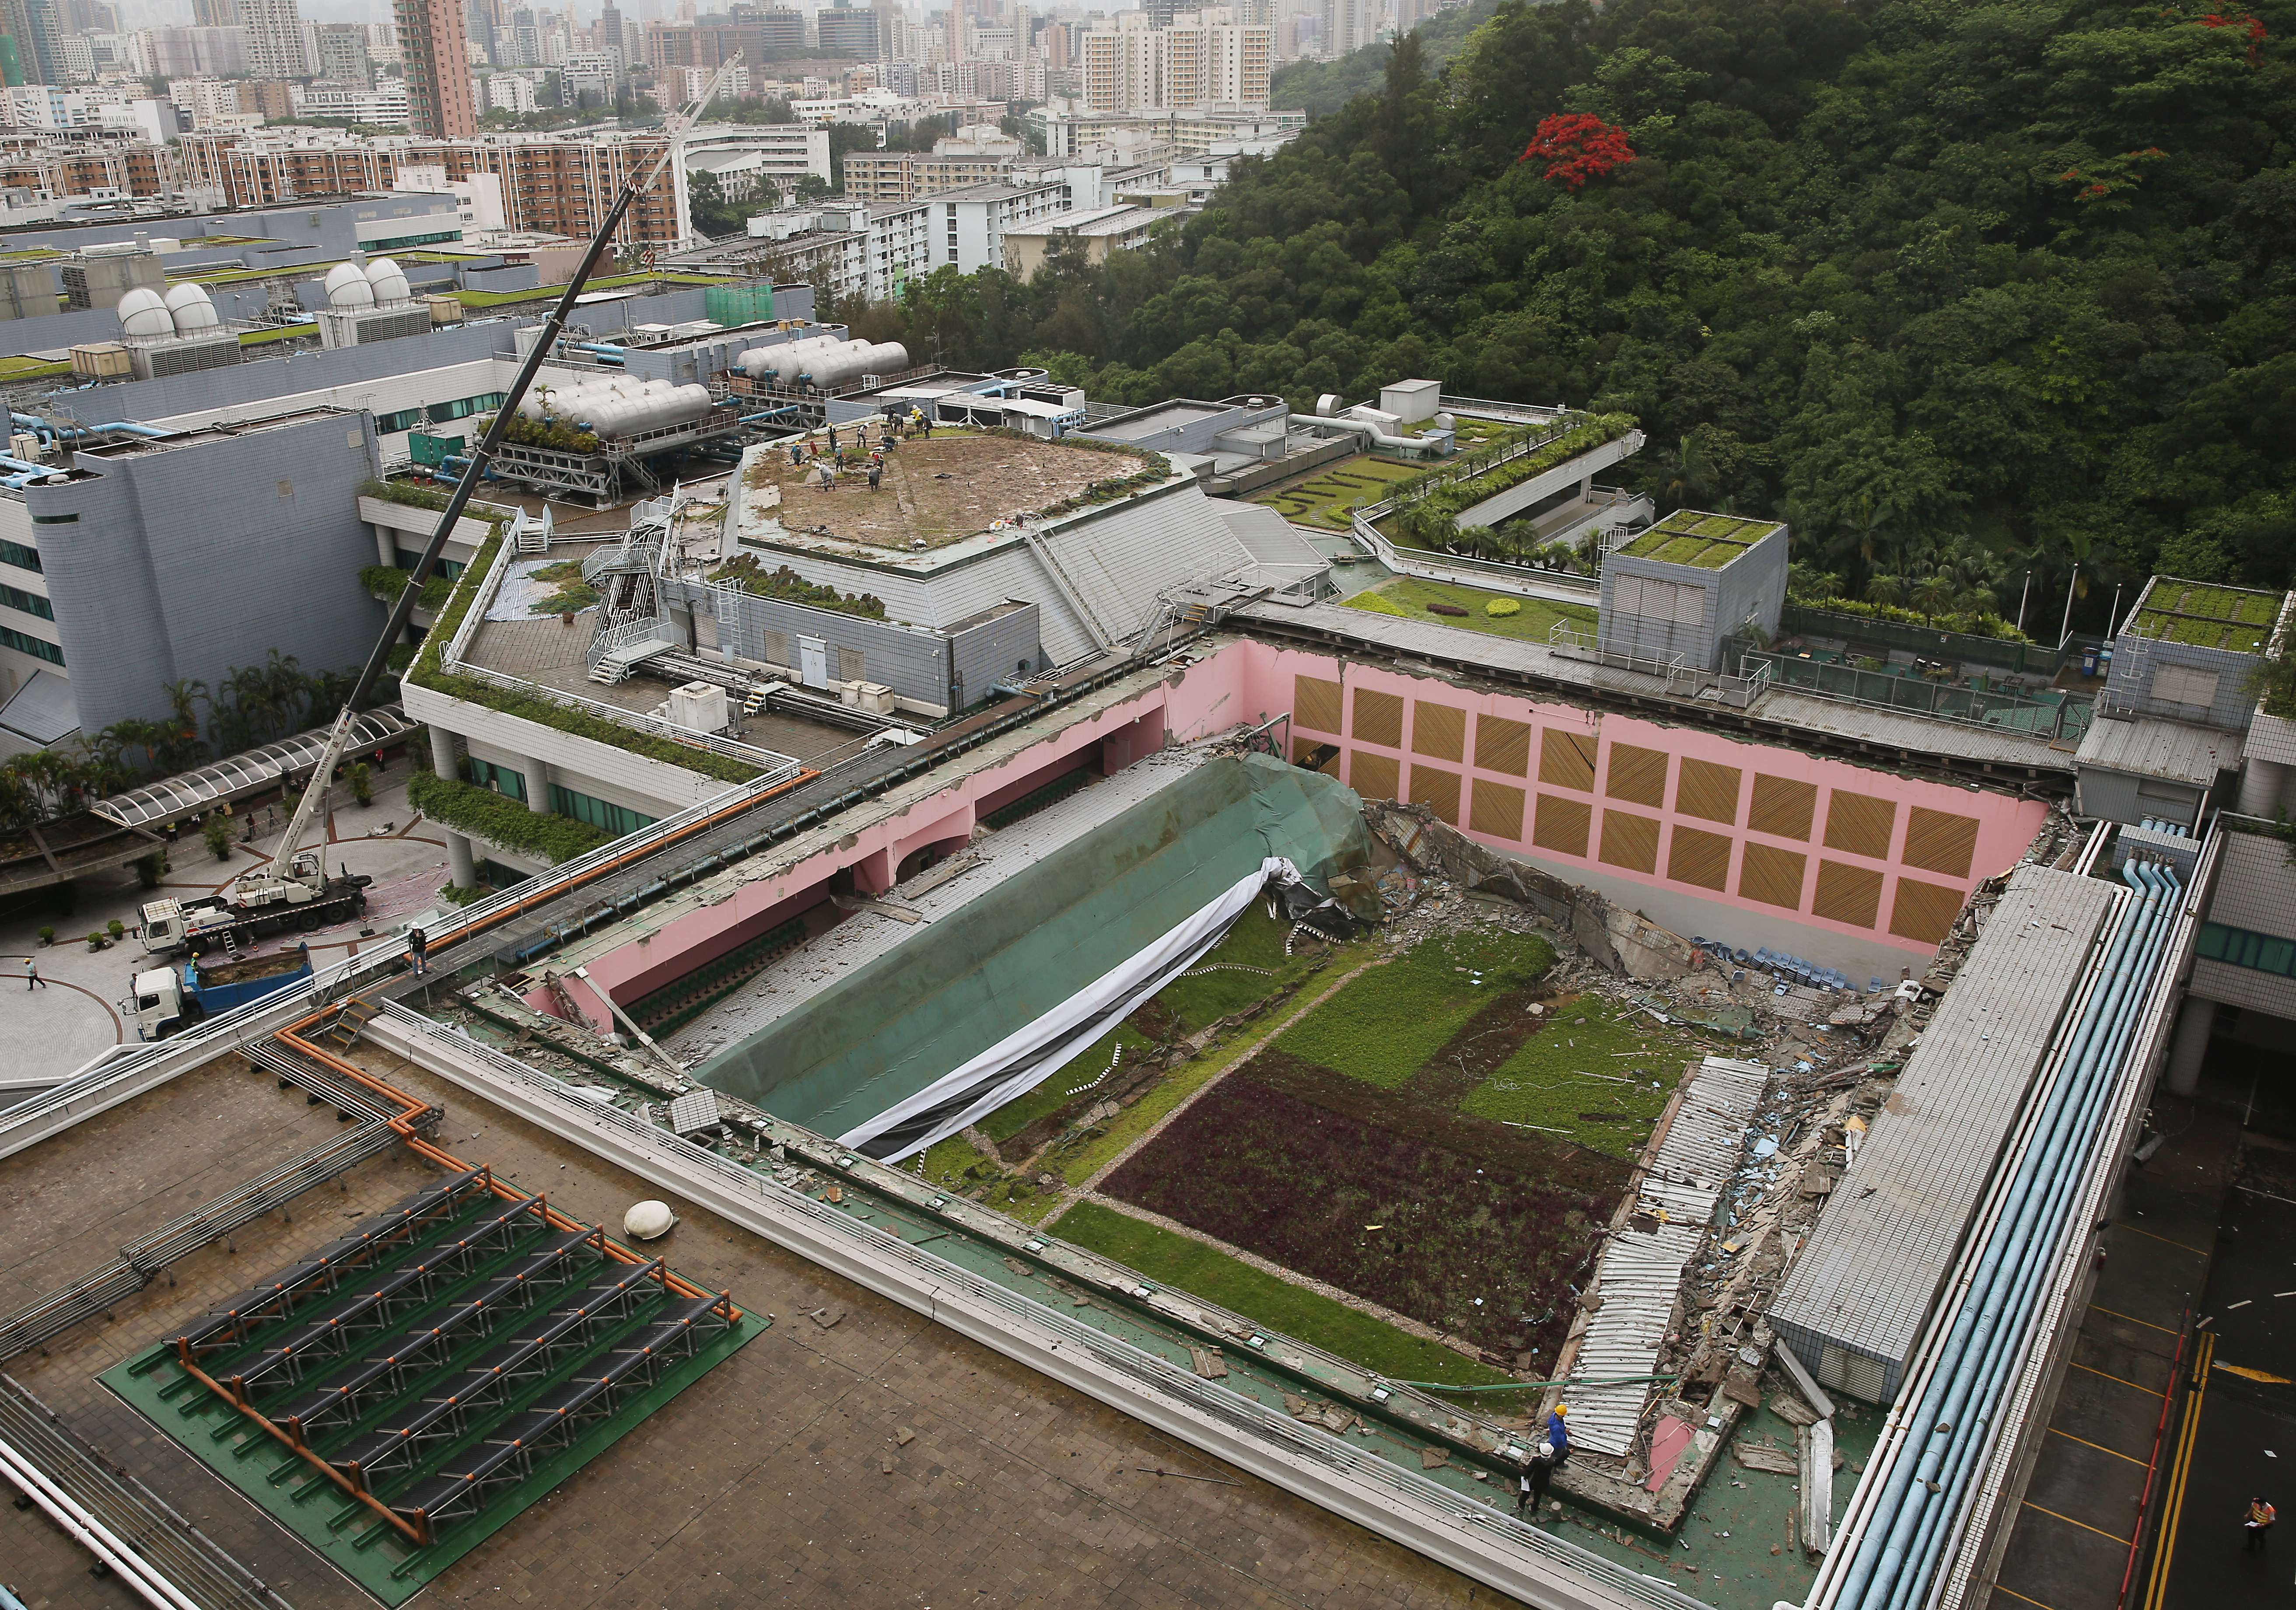 The collapsed roof on City University’s Kowloon Tong campus. Photo: Sam Tsang